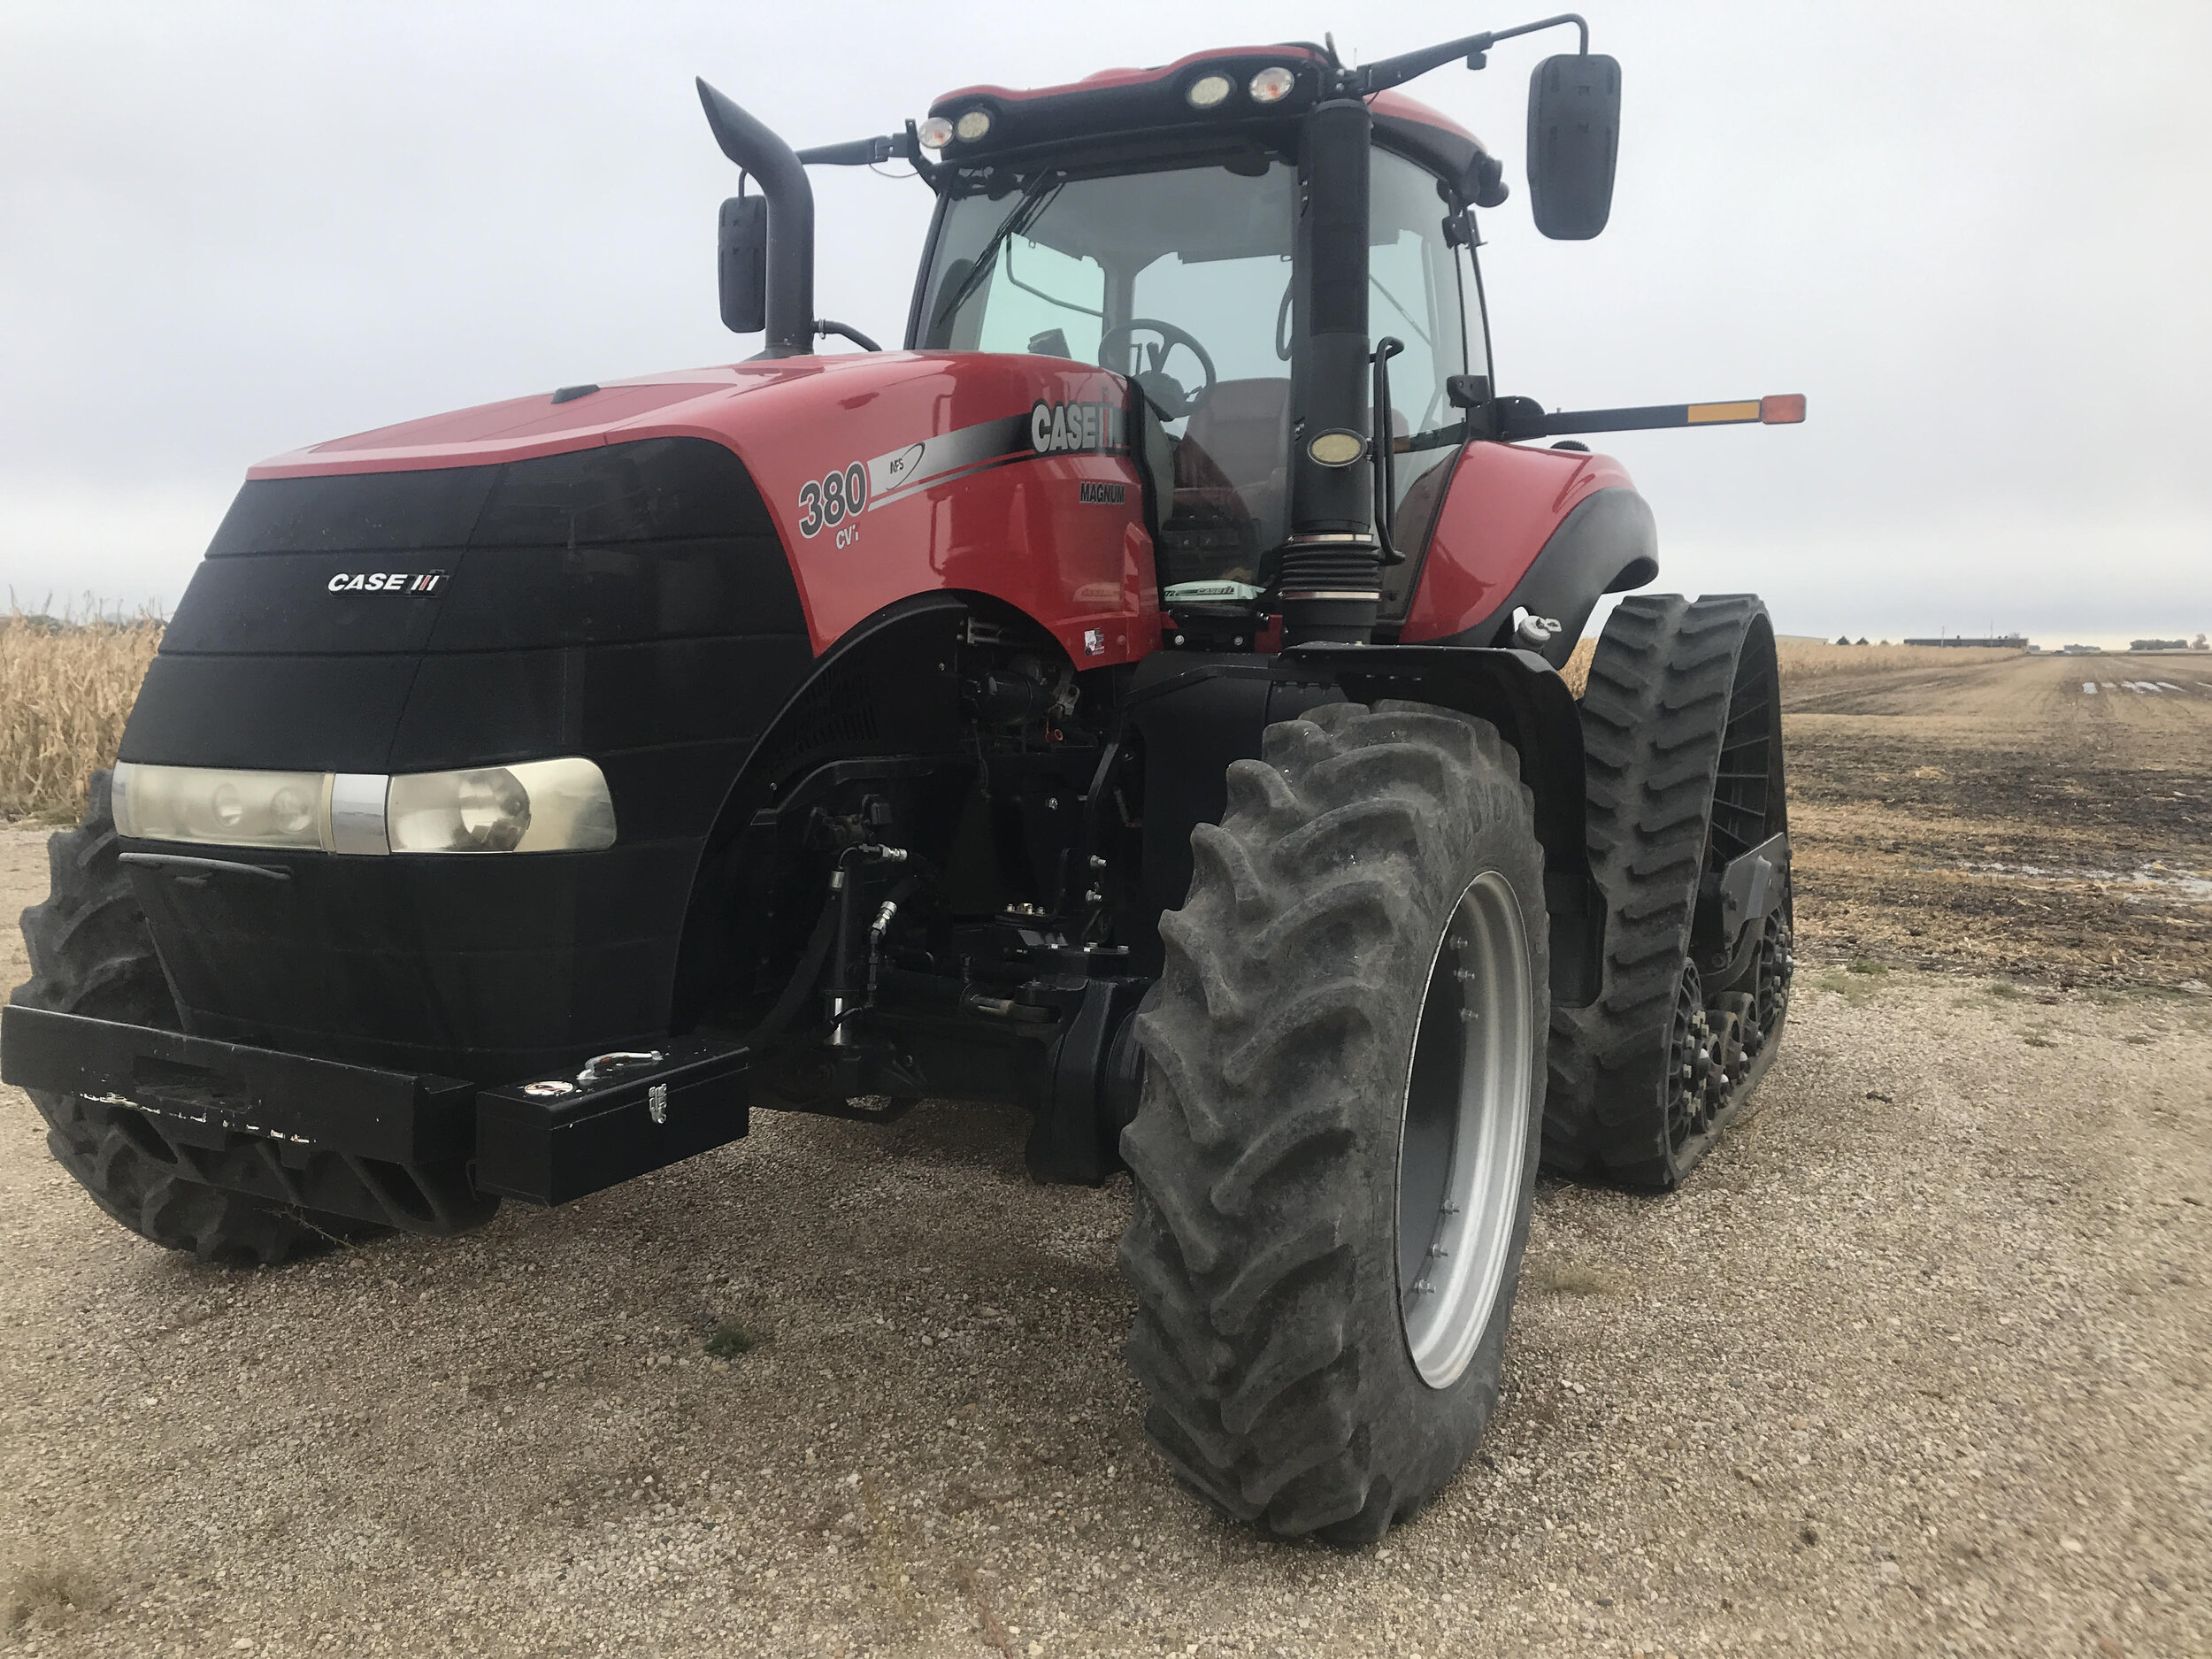 New-to-us tractor